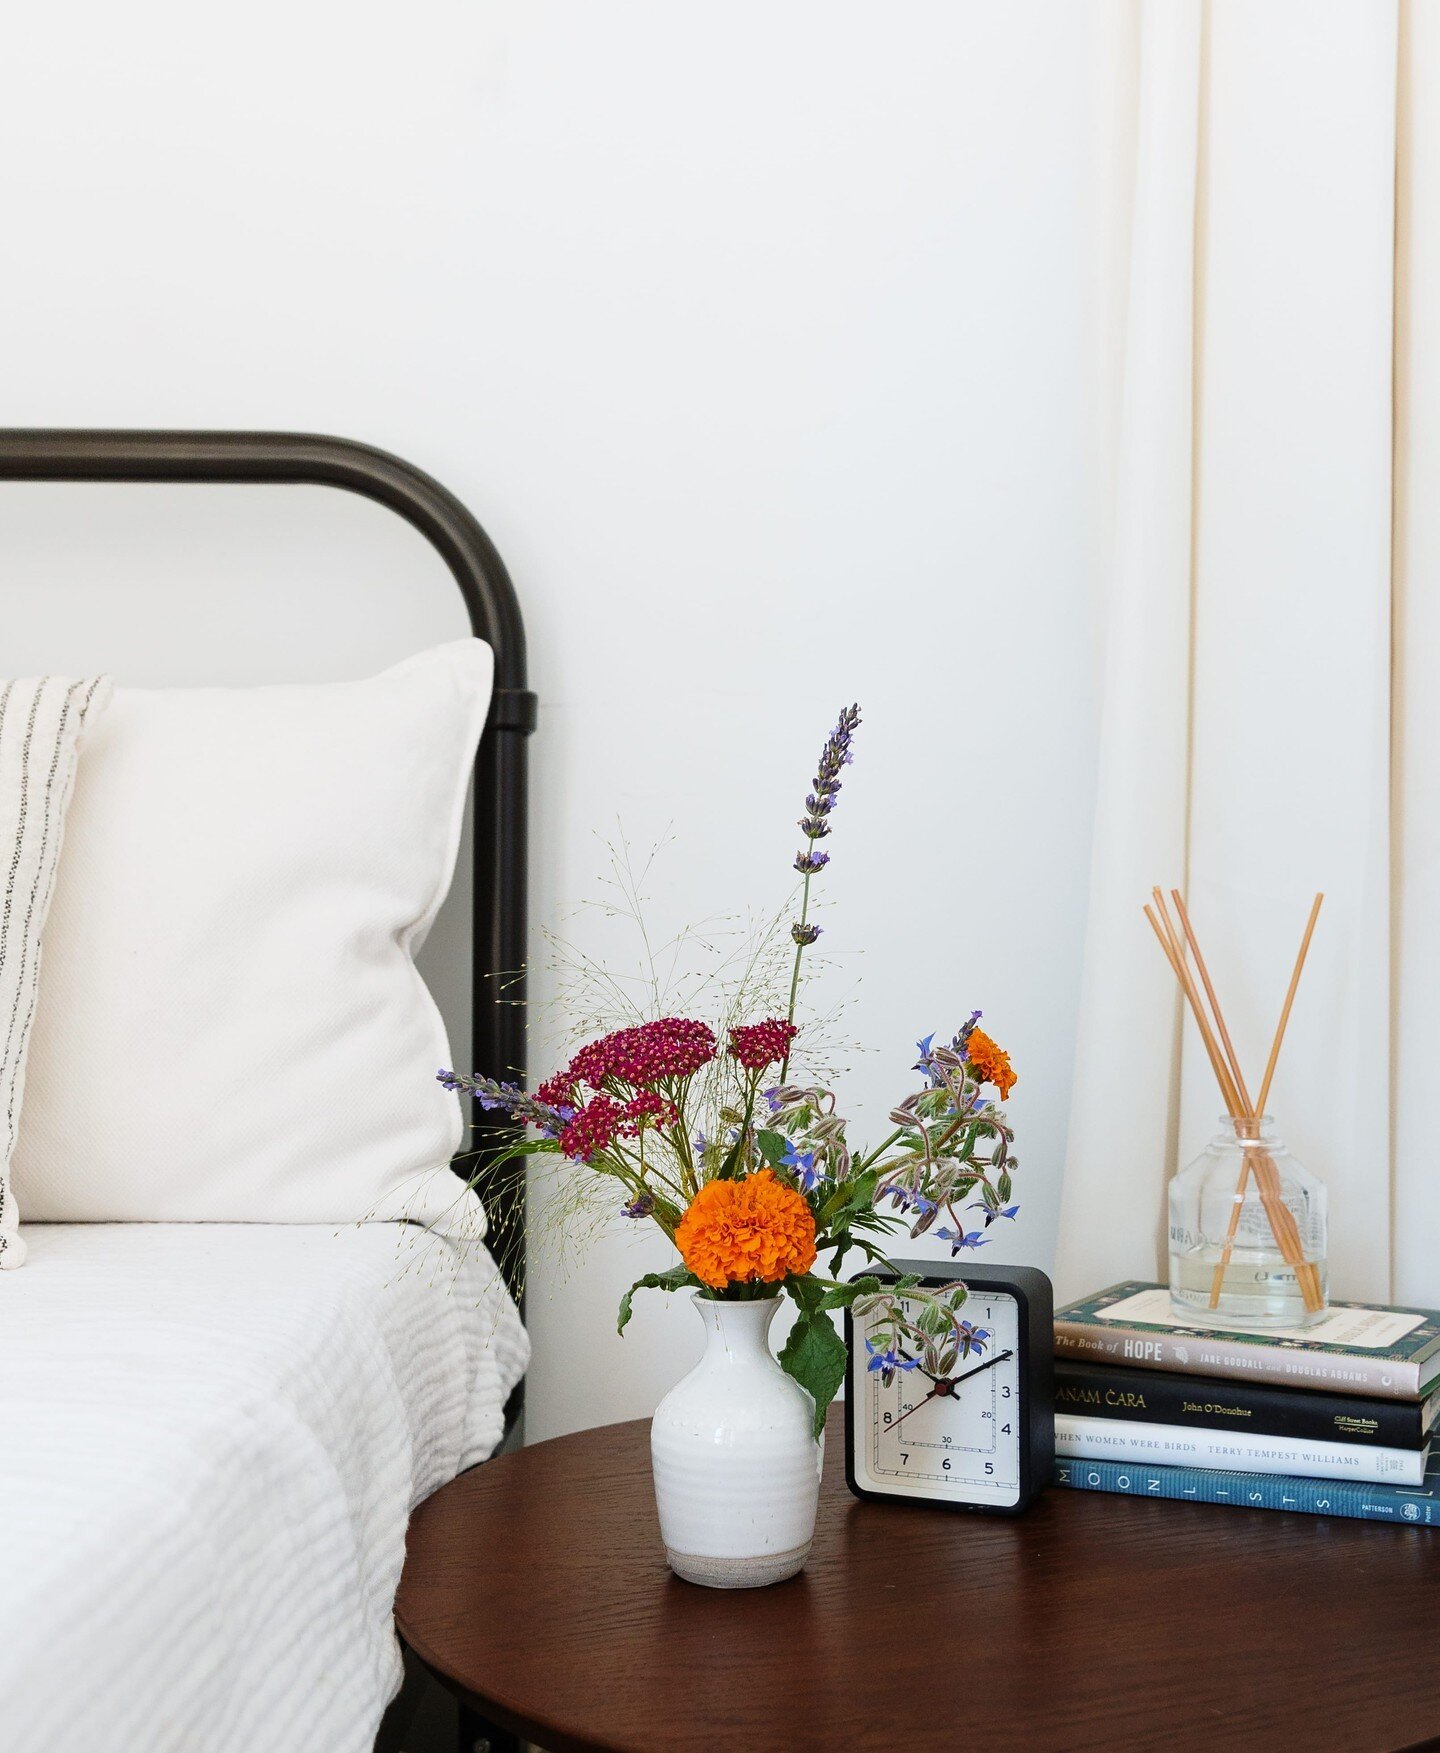 Name a better way to wake up than with a Hanselmann bud vase of fresh flowers at your bedside... 🌱🌼⁣
⁣
#flowerstagram #flowersofinstagram #florist #handtiedbouquet #flowerbouquet #springflowers #flowerhowto #abqflorist #nmflorist #santafeflorist #s